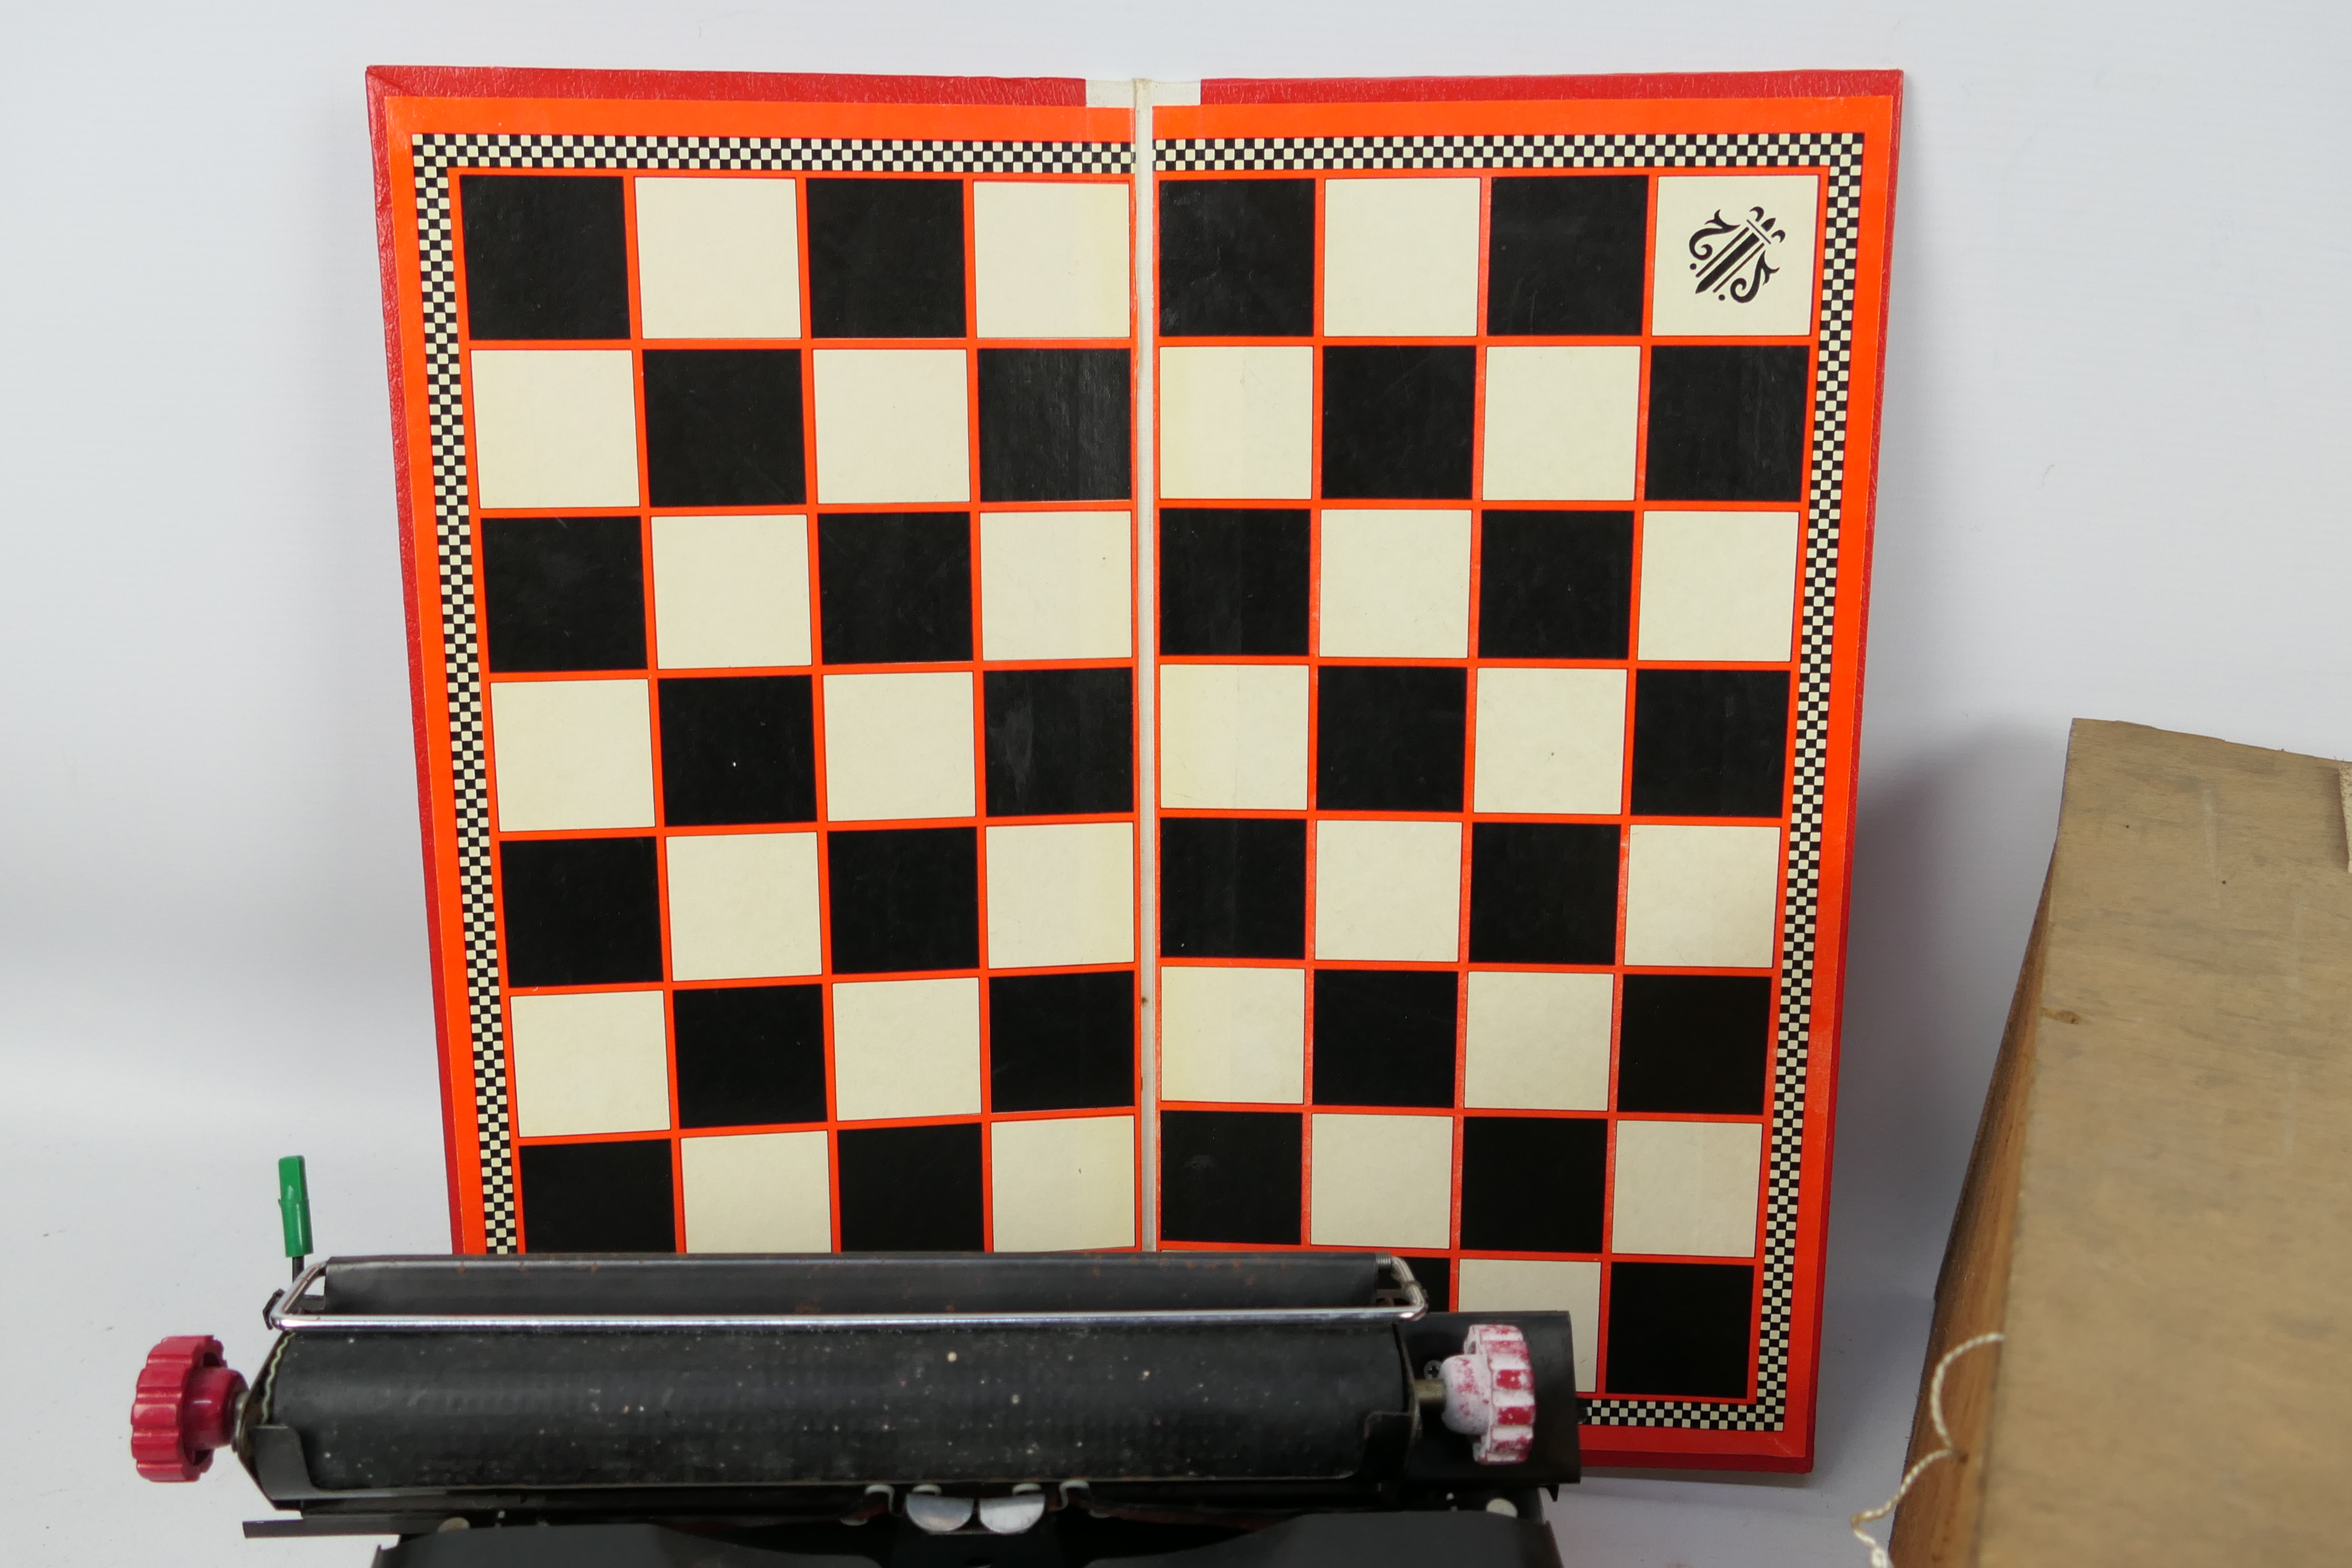 A Lilliput Mark IV typewriter contained in shipping crate and a folding chess board. - Image 3 of 3